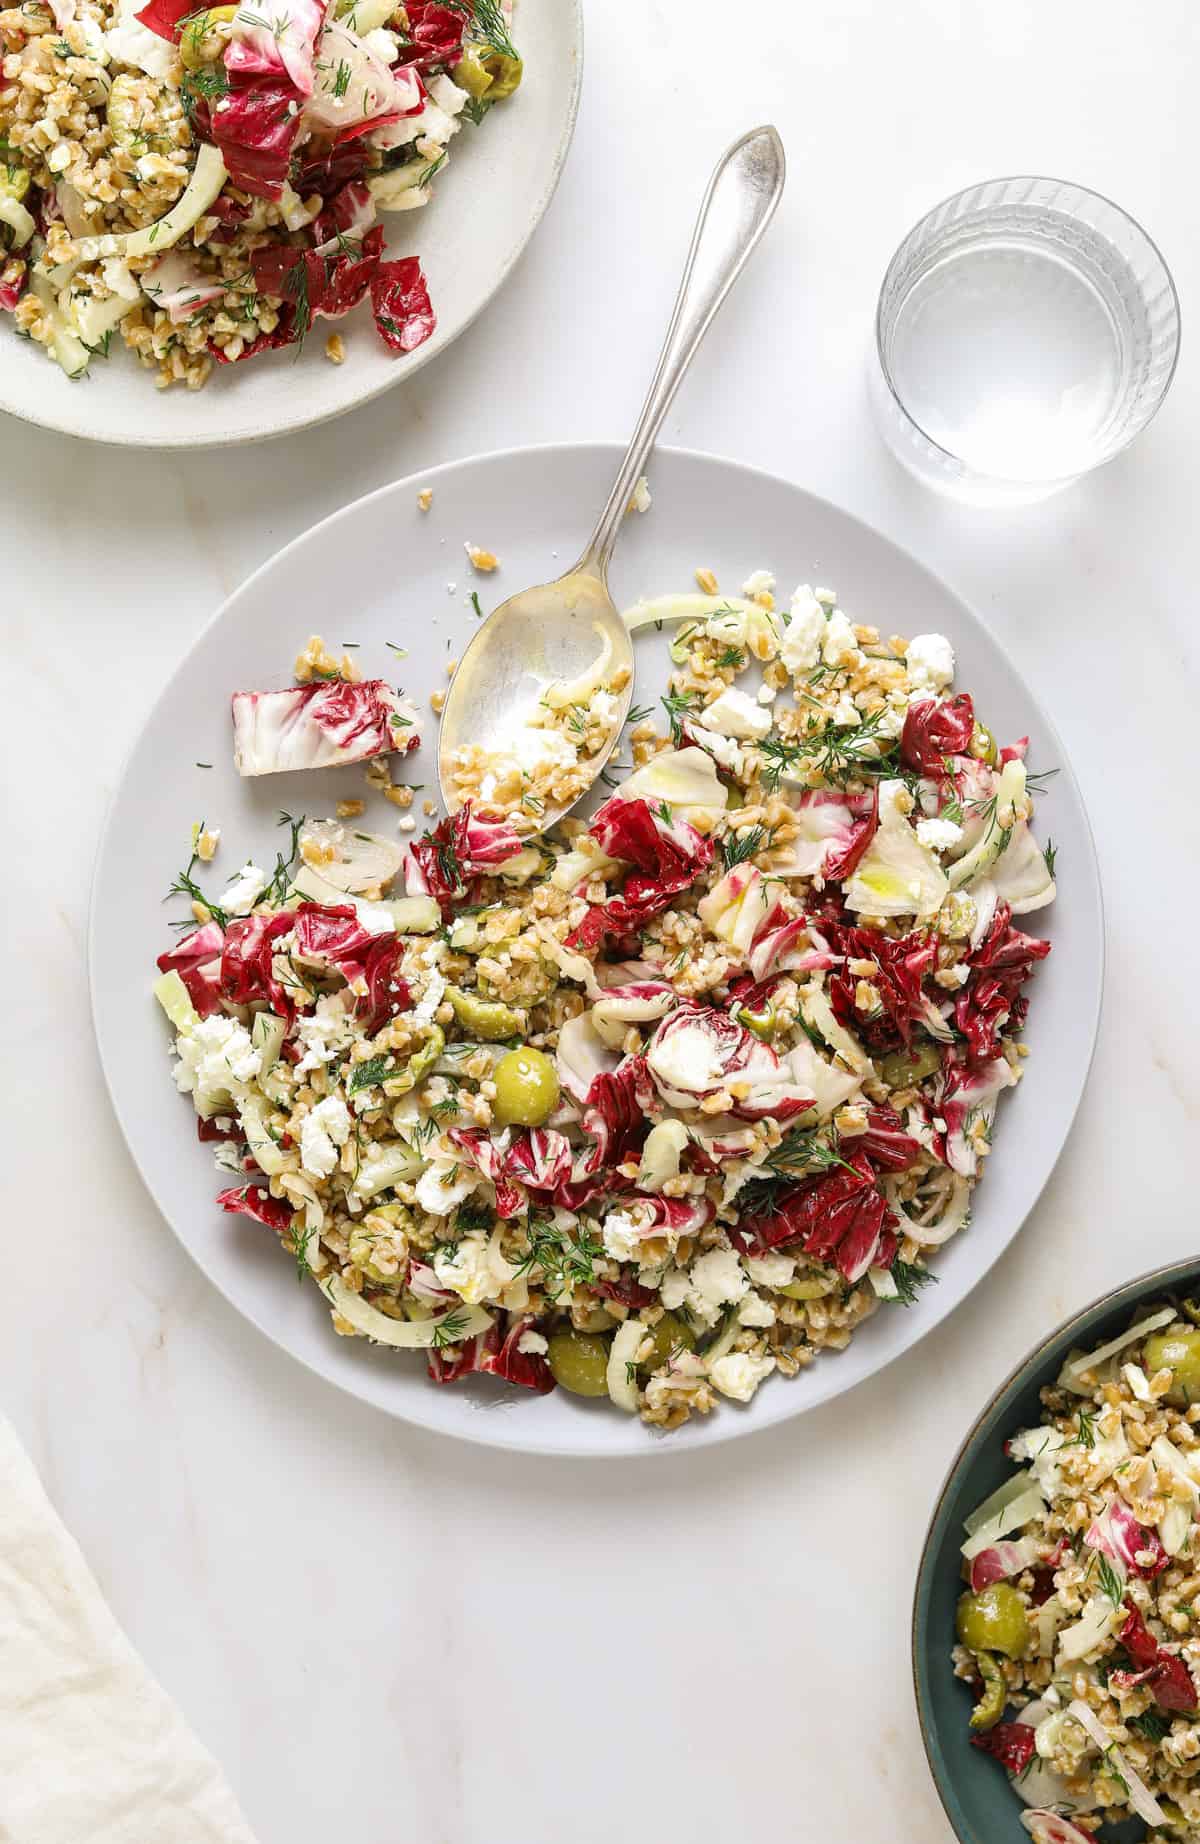 Farro Salad with Fennel, Feta and Crushed Olives